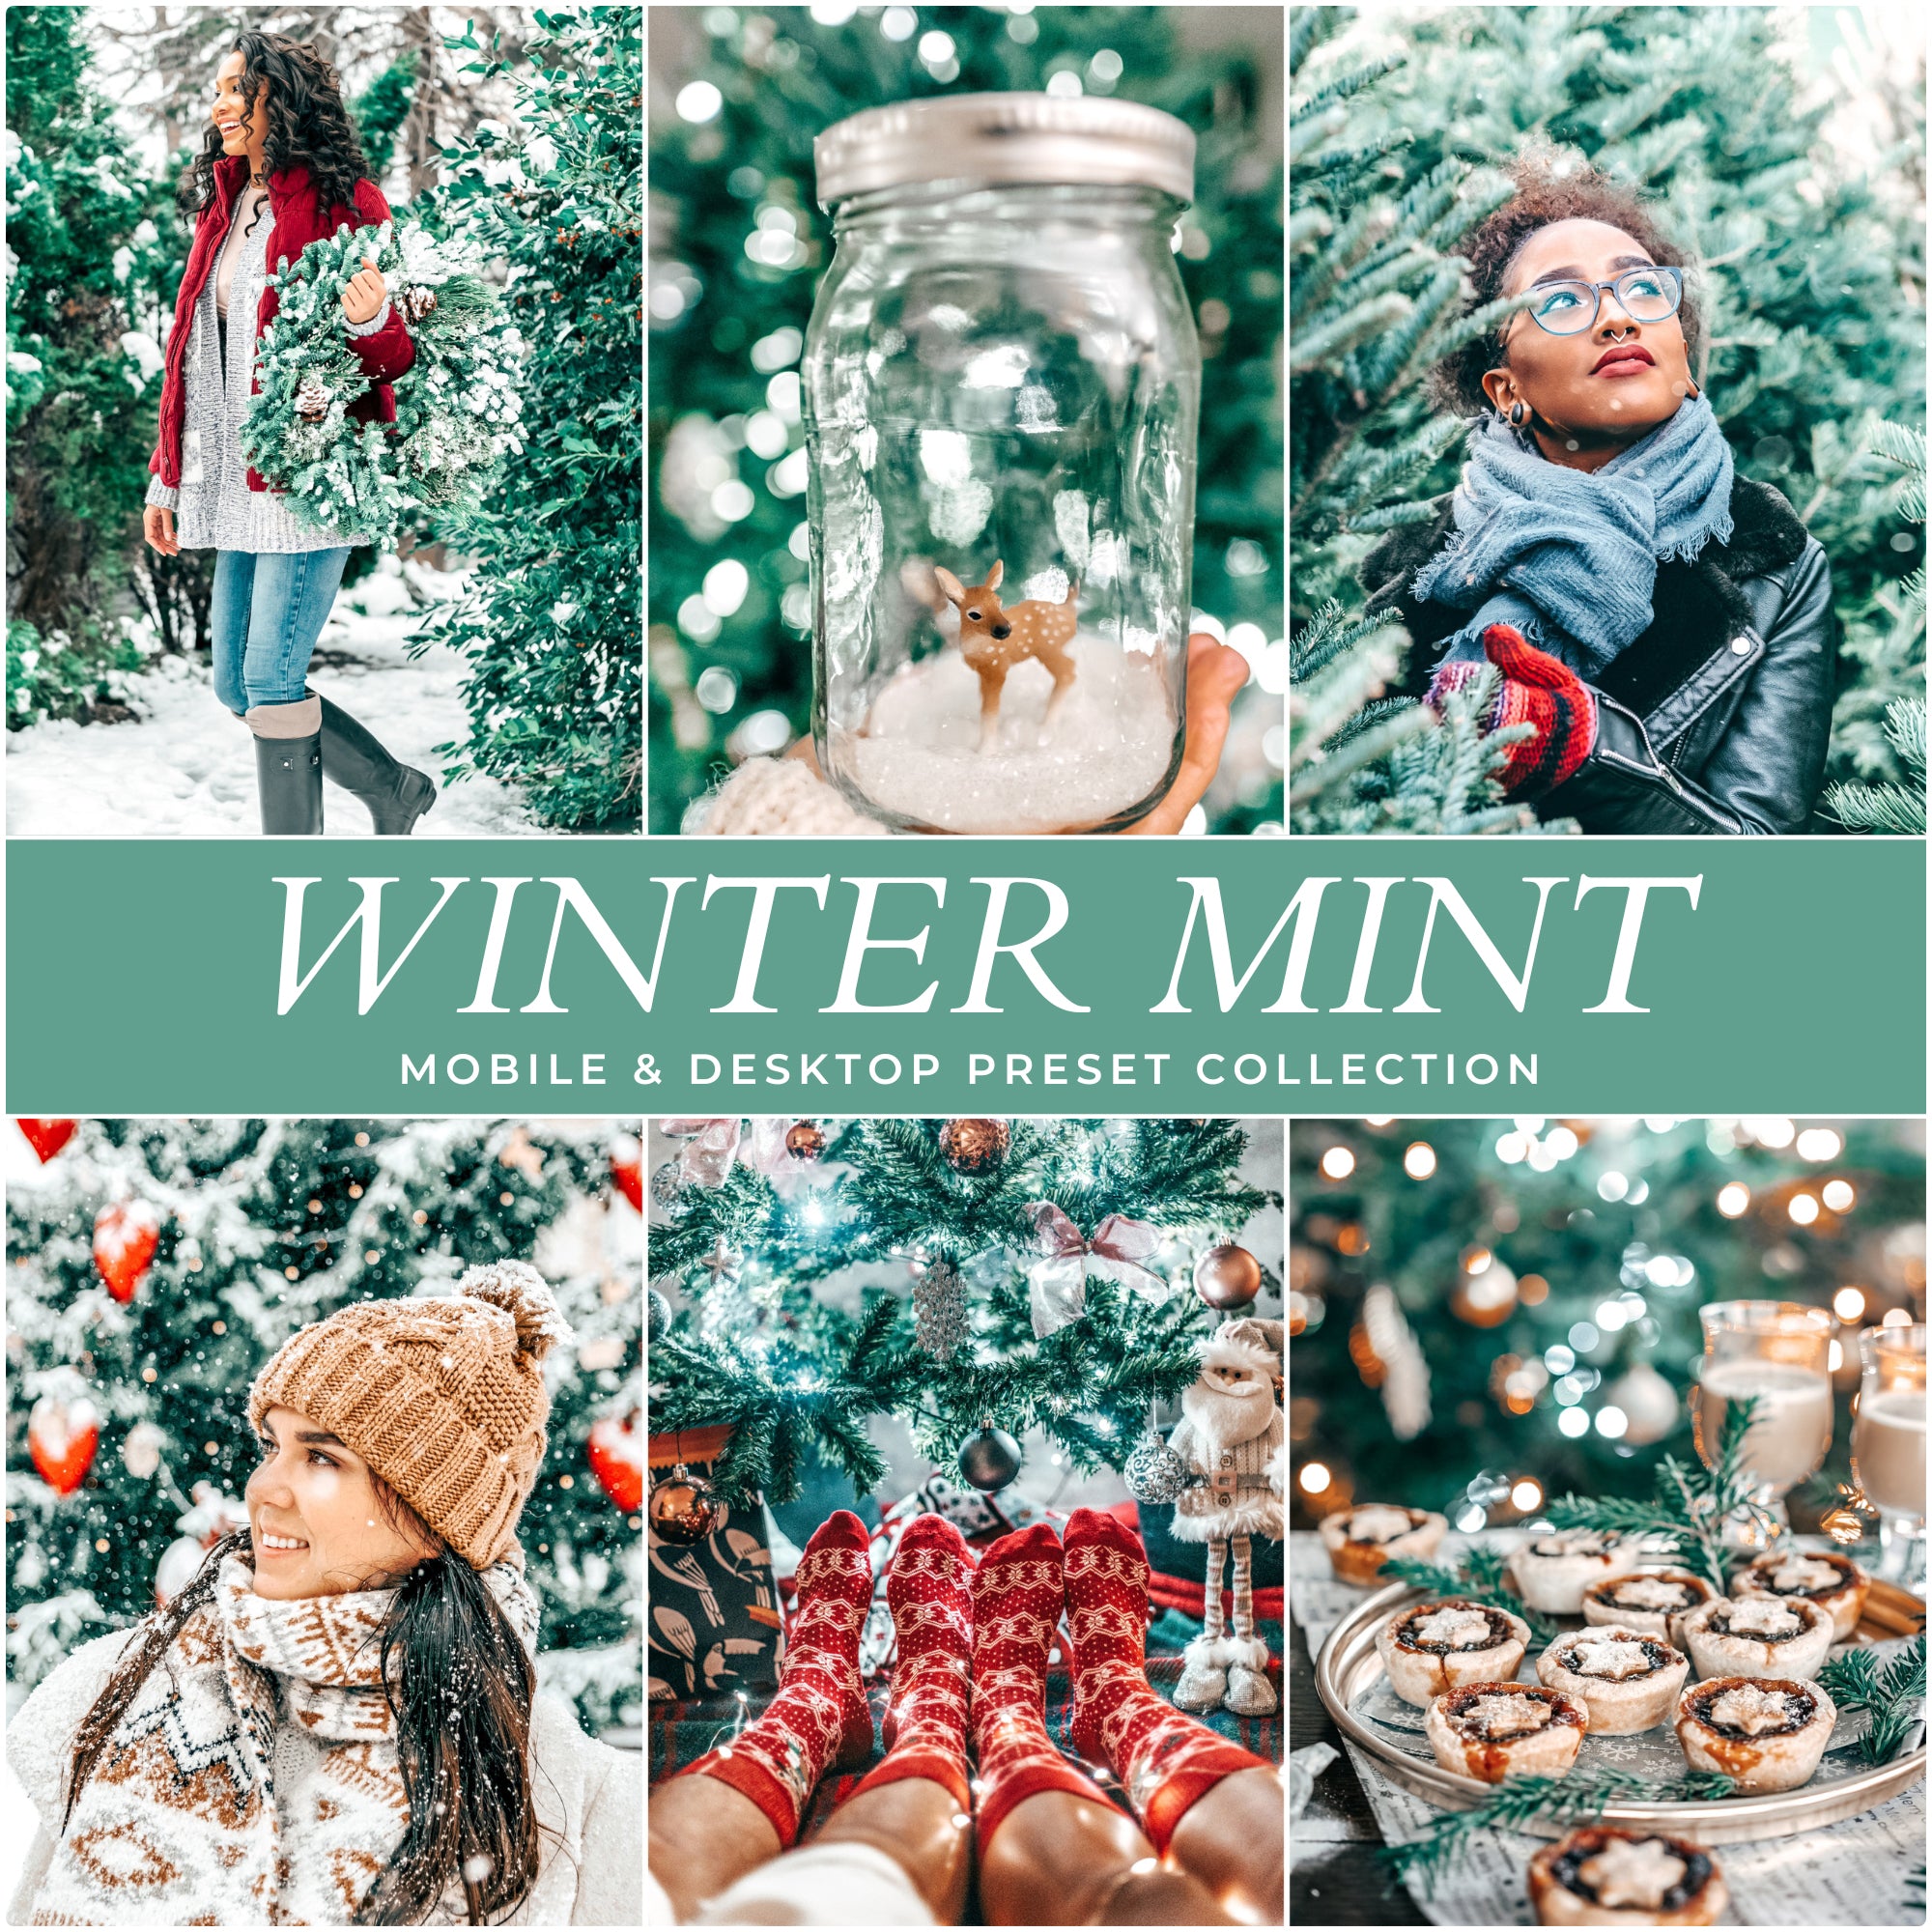 Top Christmas Lightroom Presets The Best Photo Editing Preset Filters For Christmas And Winter Holiday Photos with Adobe Lightroom Mobile And Desktop For Photographers and Instagram Influencers By Lou And Marks Presets